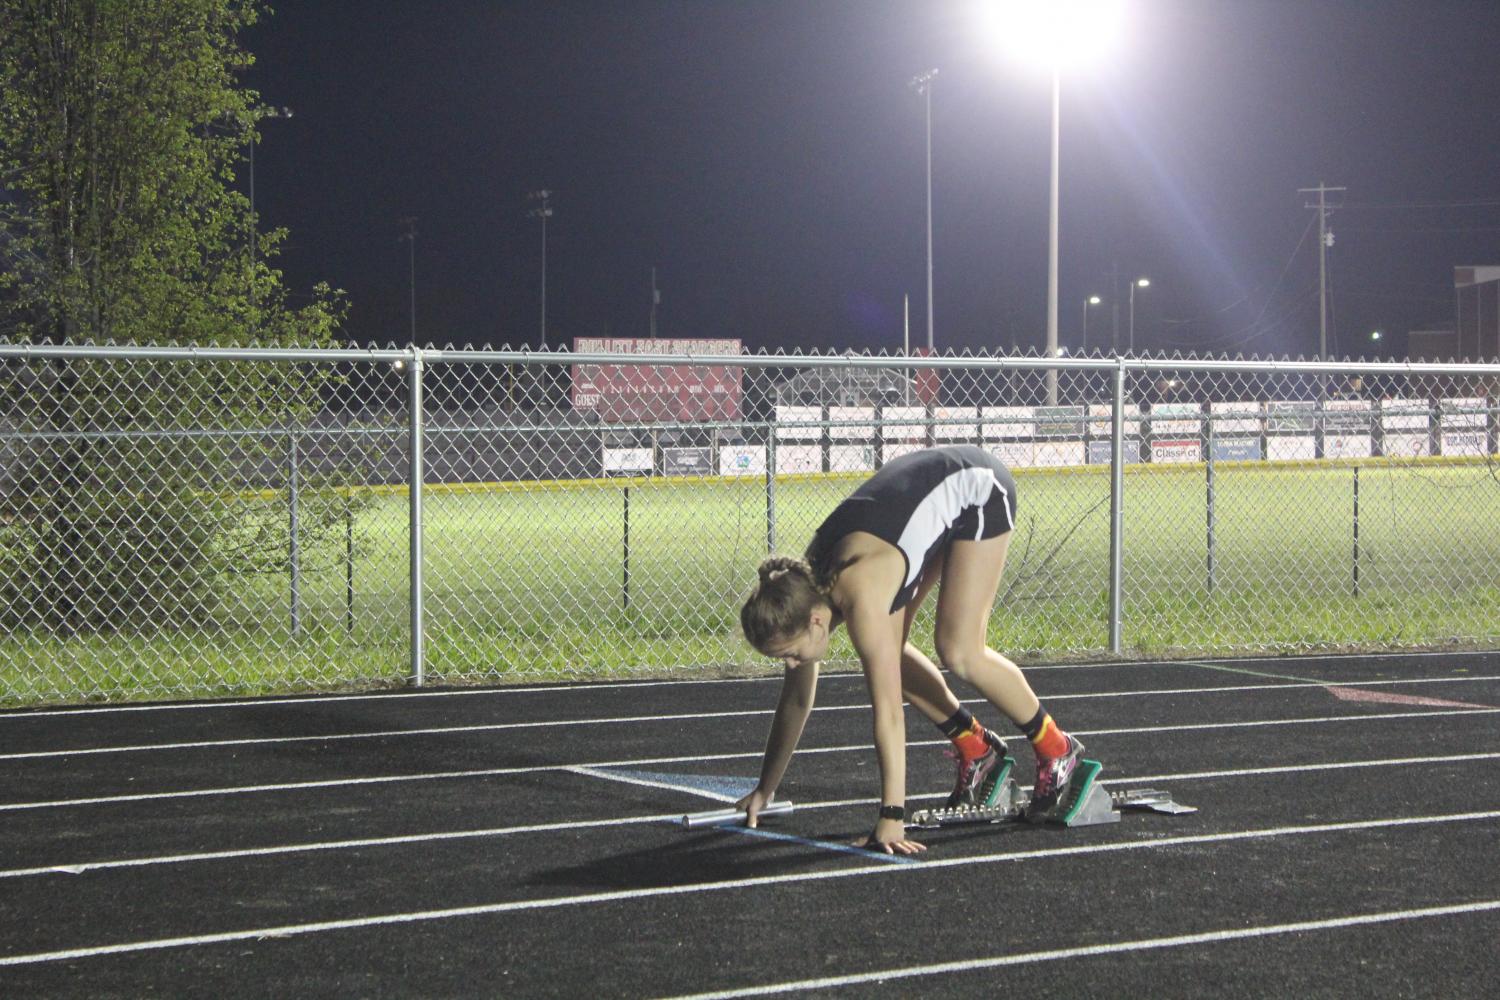 Senior Lauren Masden gets ready for one of her races at Bullitt East. Picture Credit: Haley Grether